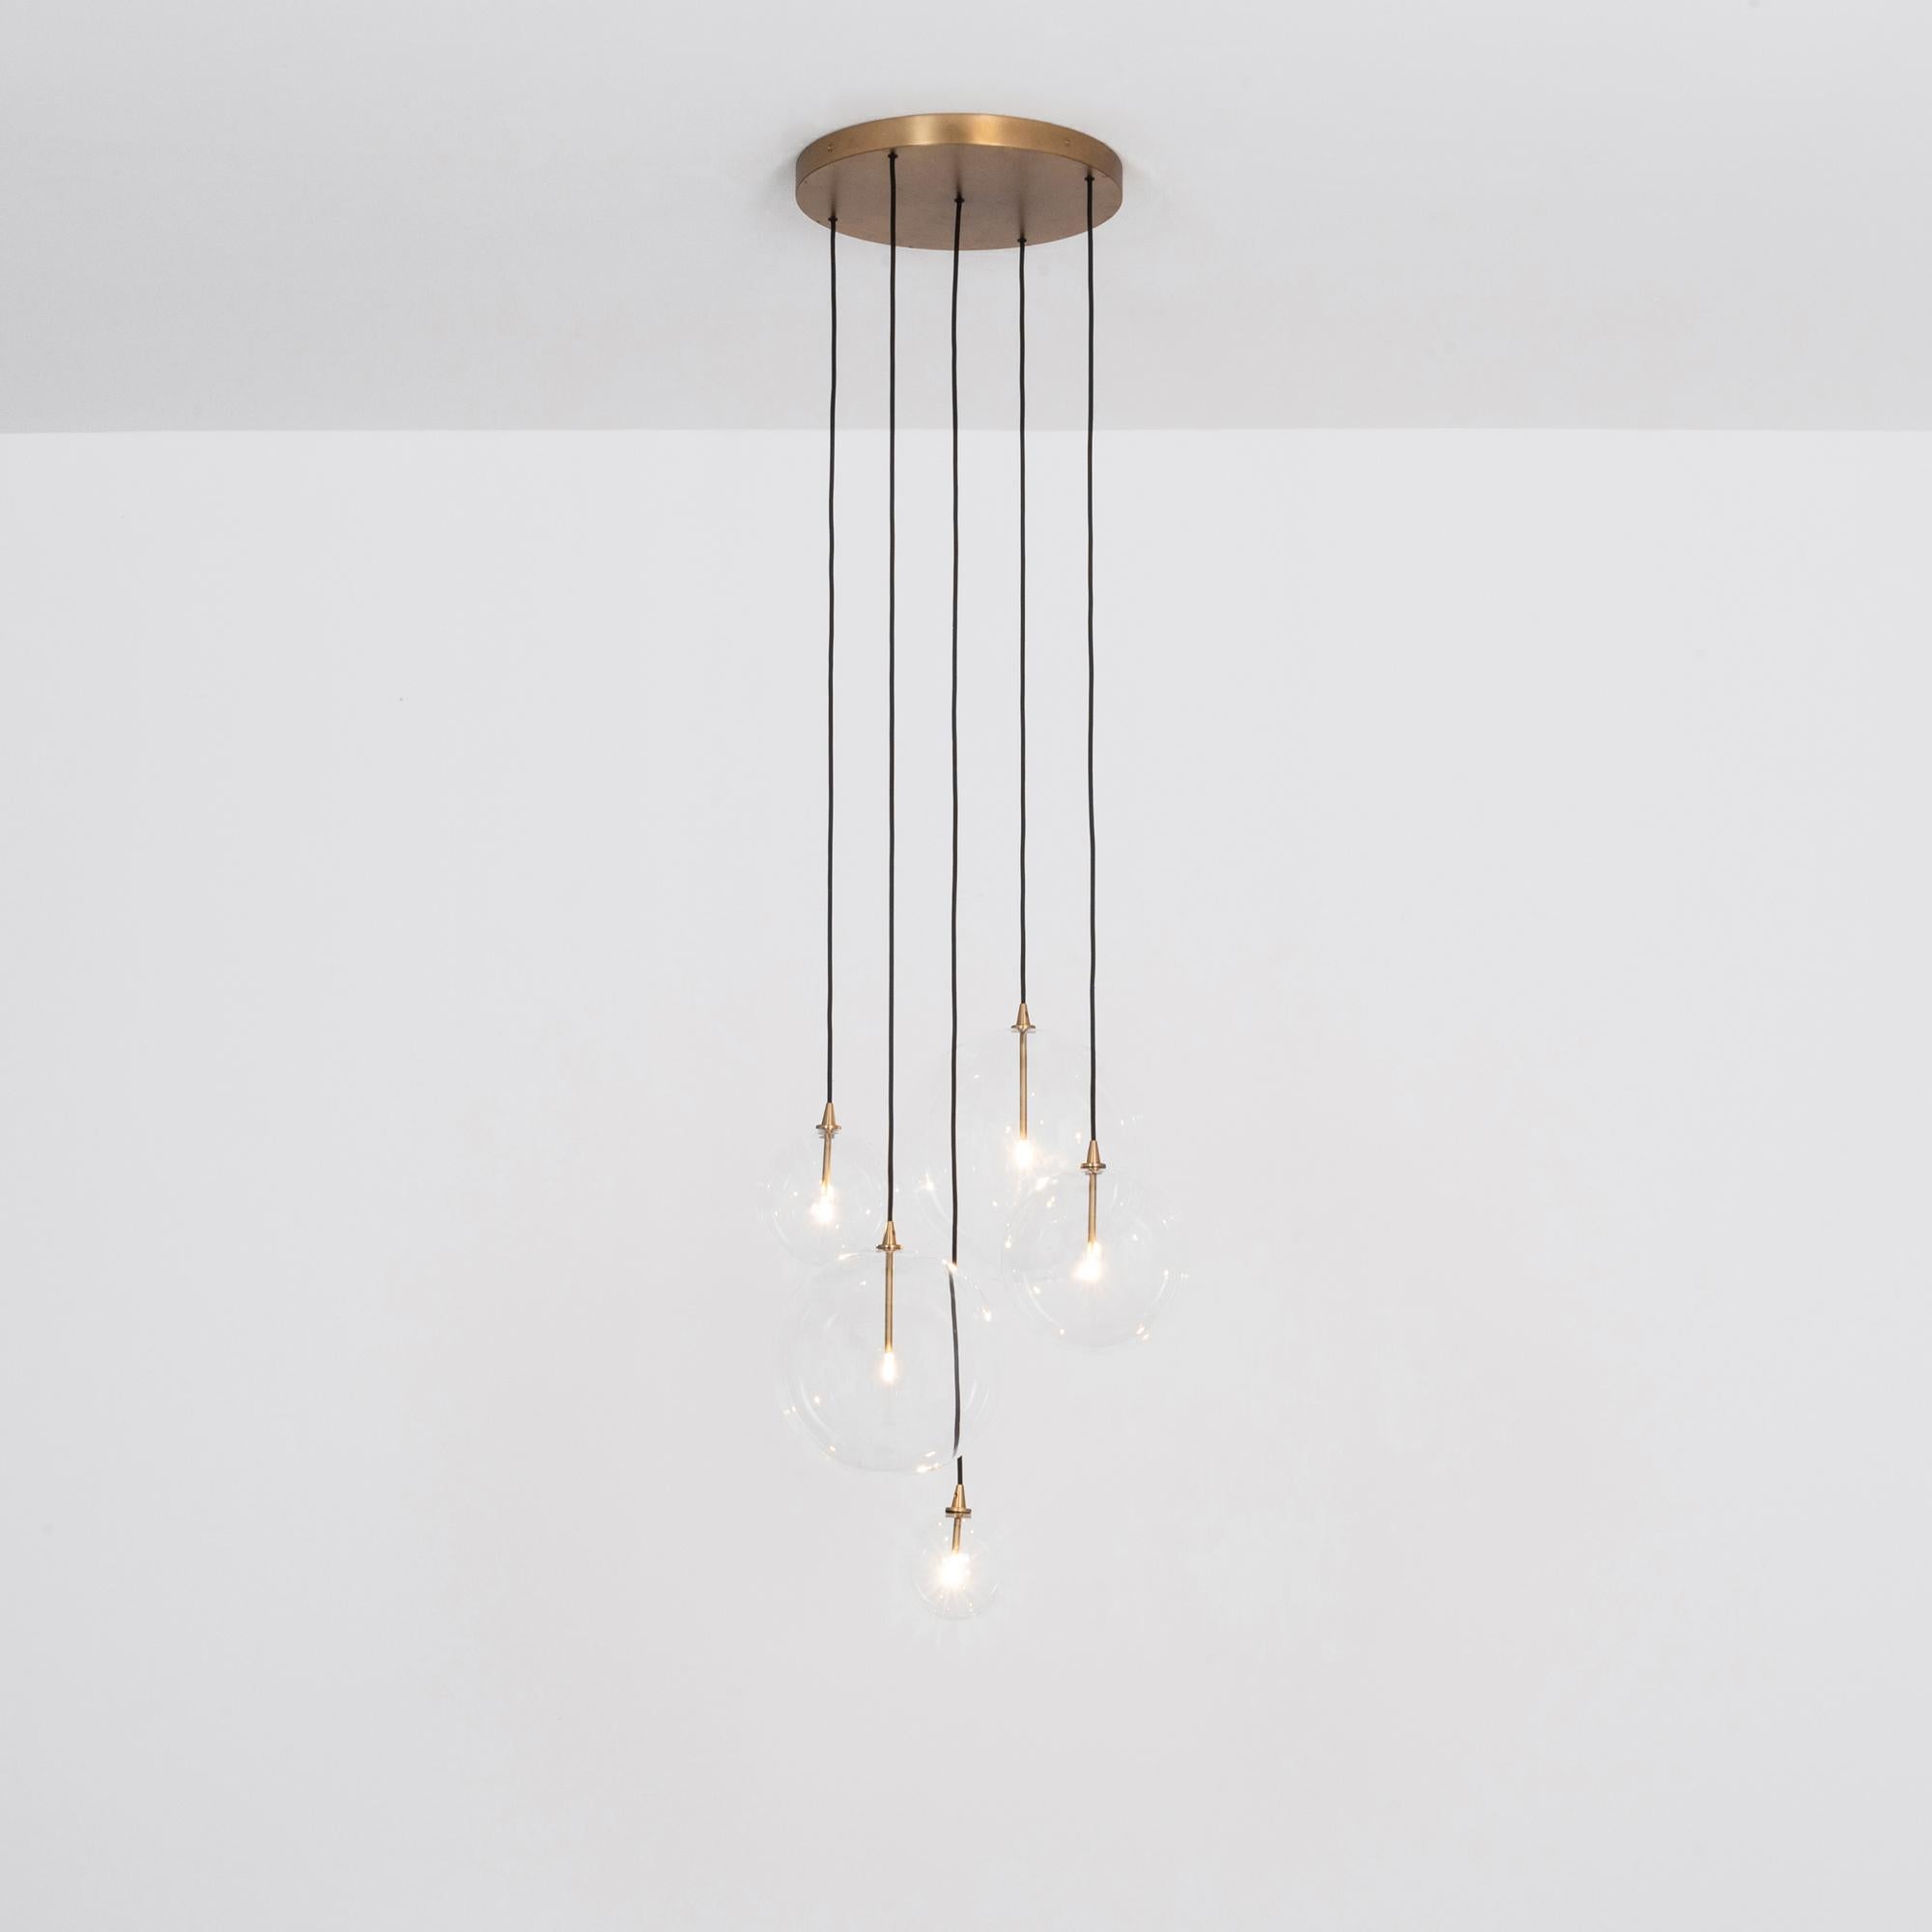 Cluster 5 Mix Chandelier in Solid Brass by Schwung
Dimensions: W 62 x D 72 x H 315 cm
Materials: Natural brass, hand blown glass globes

Ceiling plate diameter 45cm / H 4.5 cm
Glass globes diameter 35 / 30 / 25 / 20 / 15 cm
Max qty of bulbs